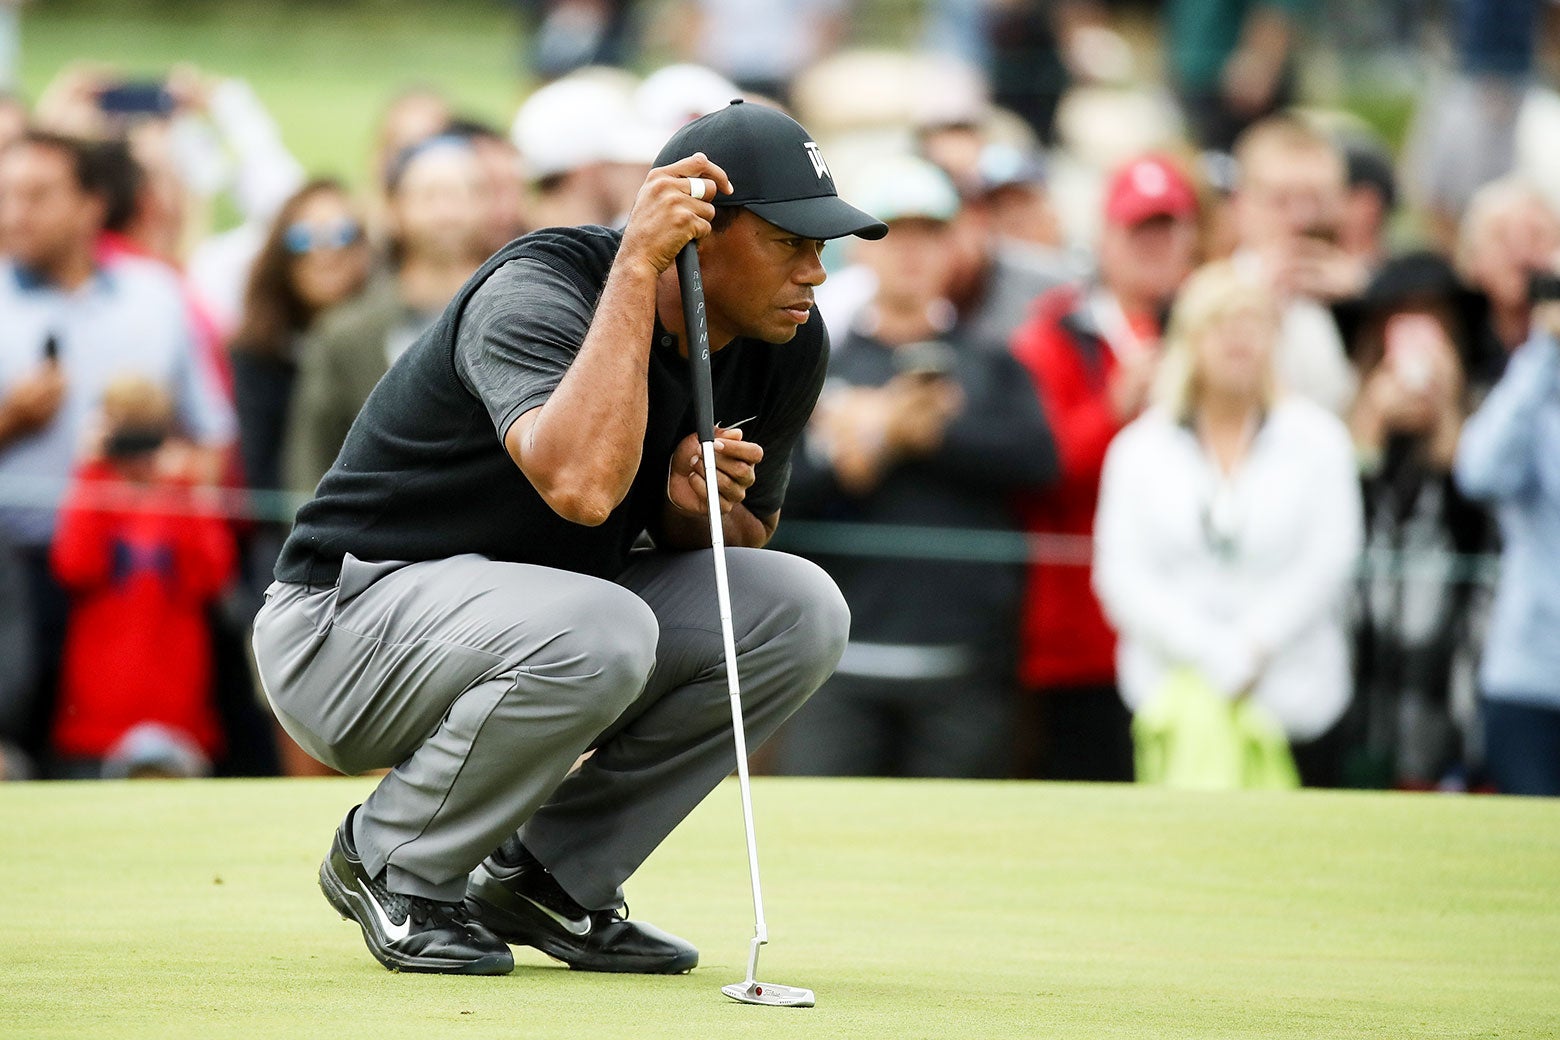 Tiger Woods lines up a putt on the 10th green during the third round of the BMW Championship.